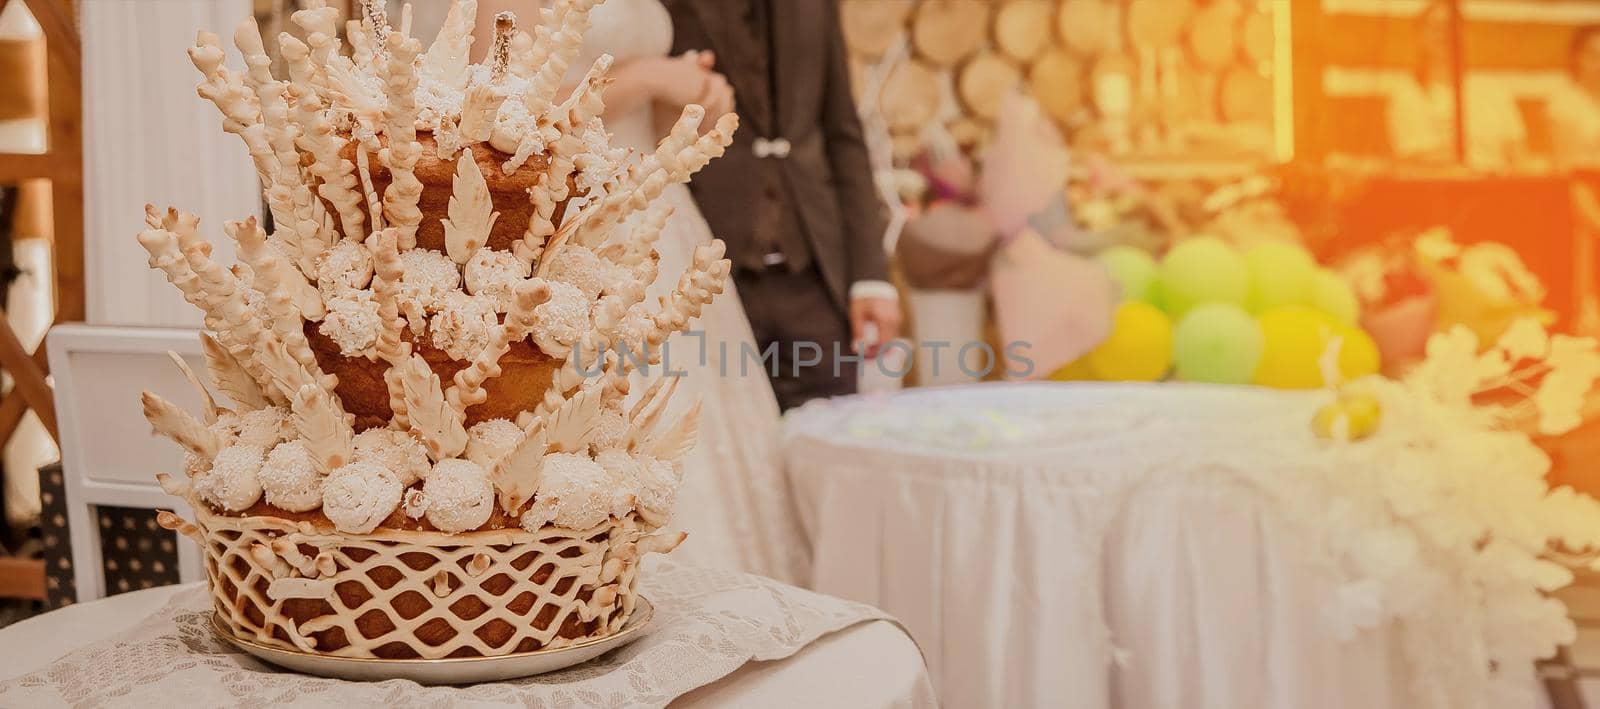 Wedding pastries, multi-tiered decorative pie, confectionery delicacy by AYDO8